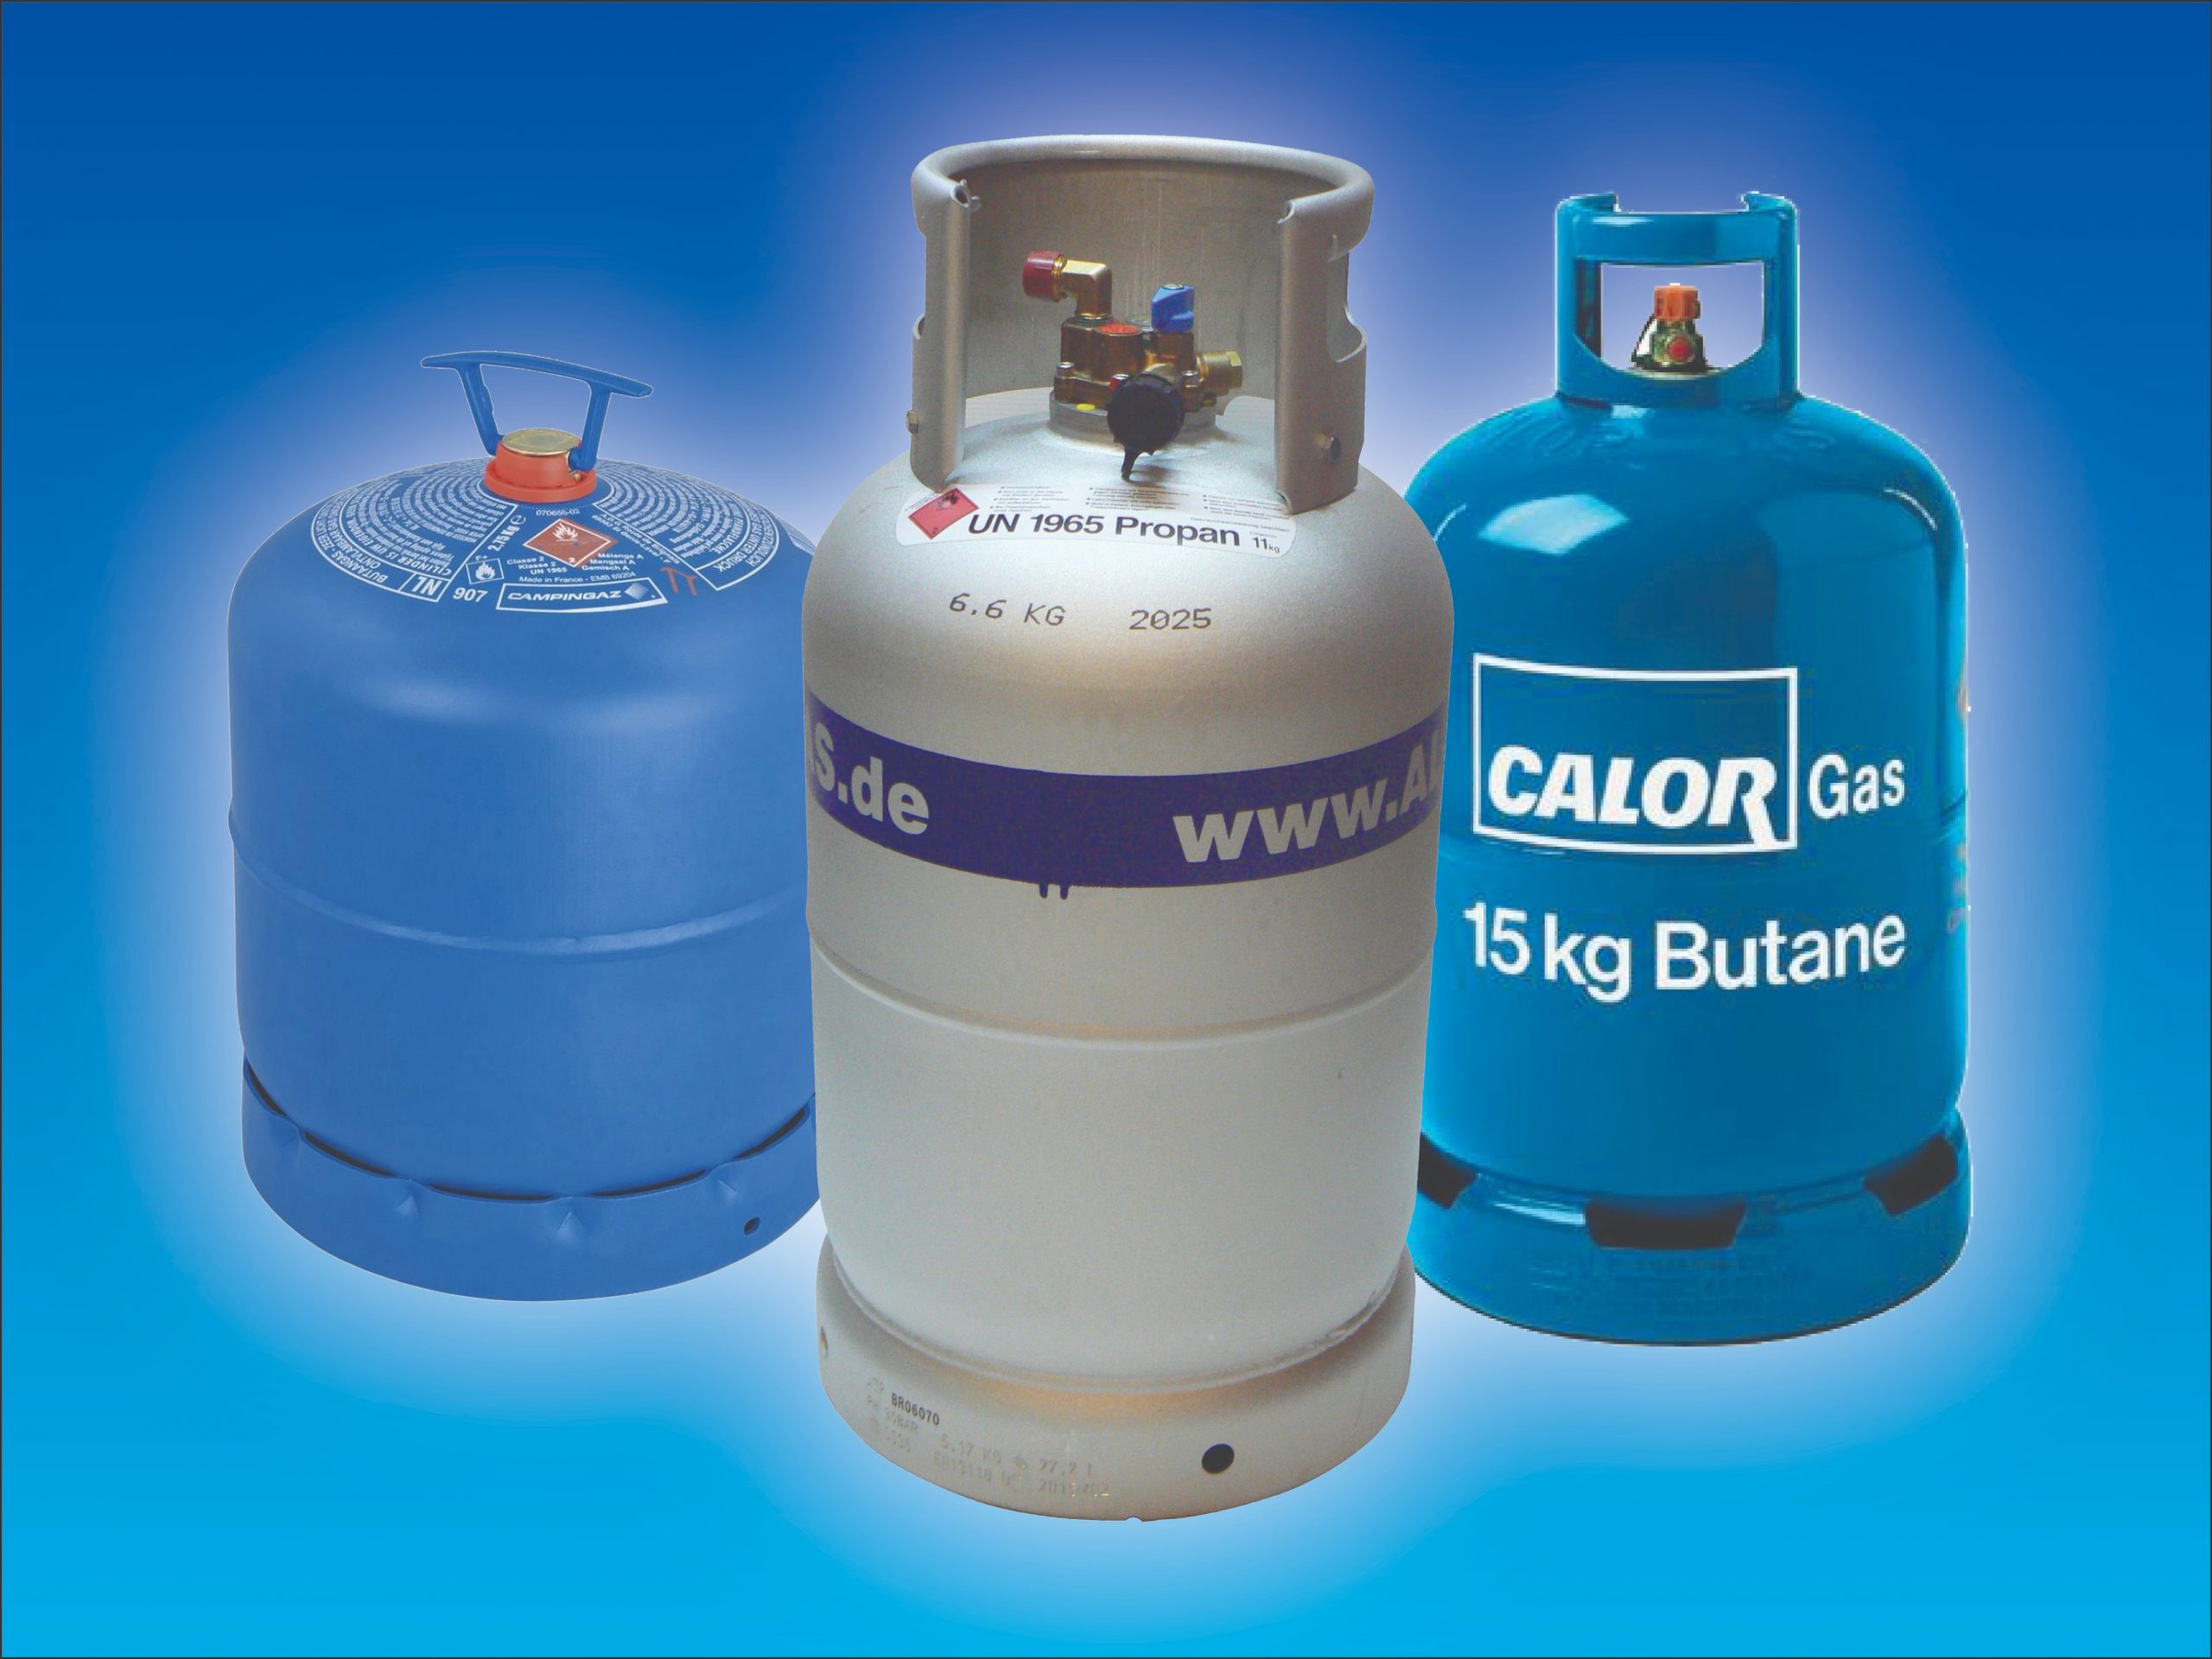 LPG Gas: What is the Difference Between Propane and Butane?